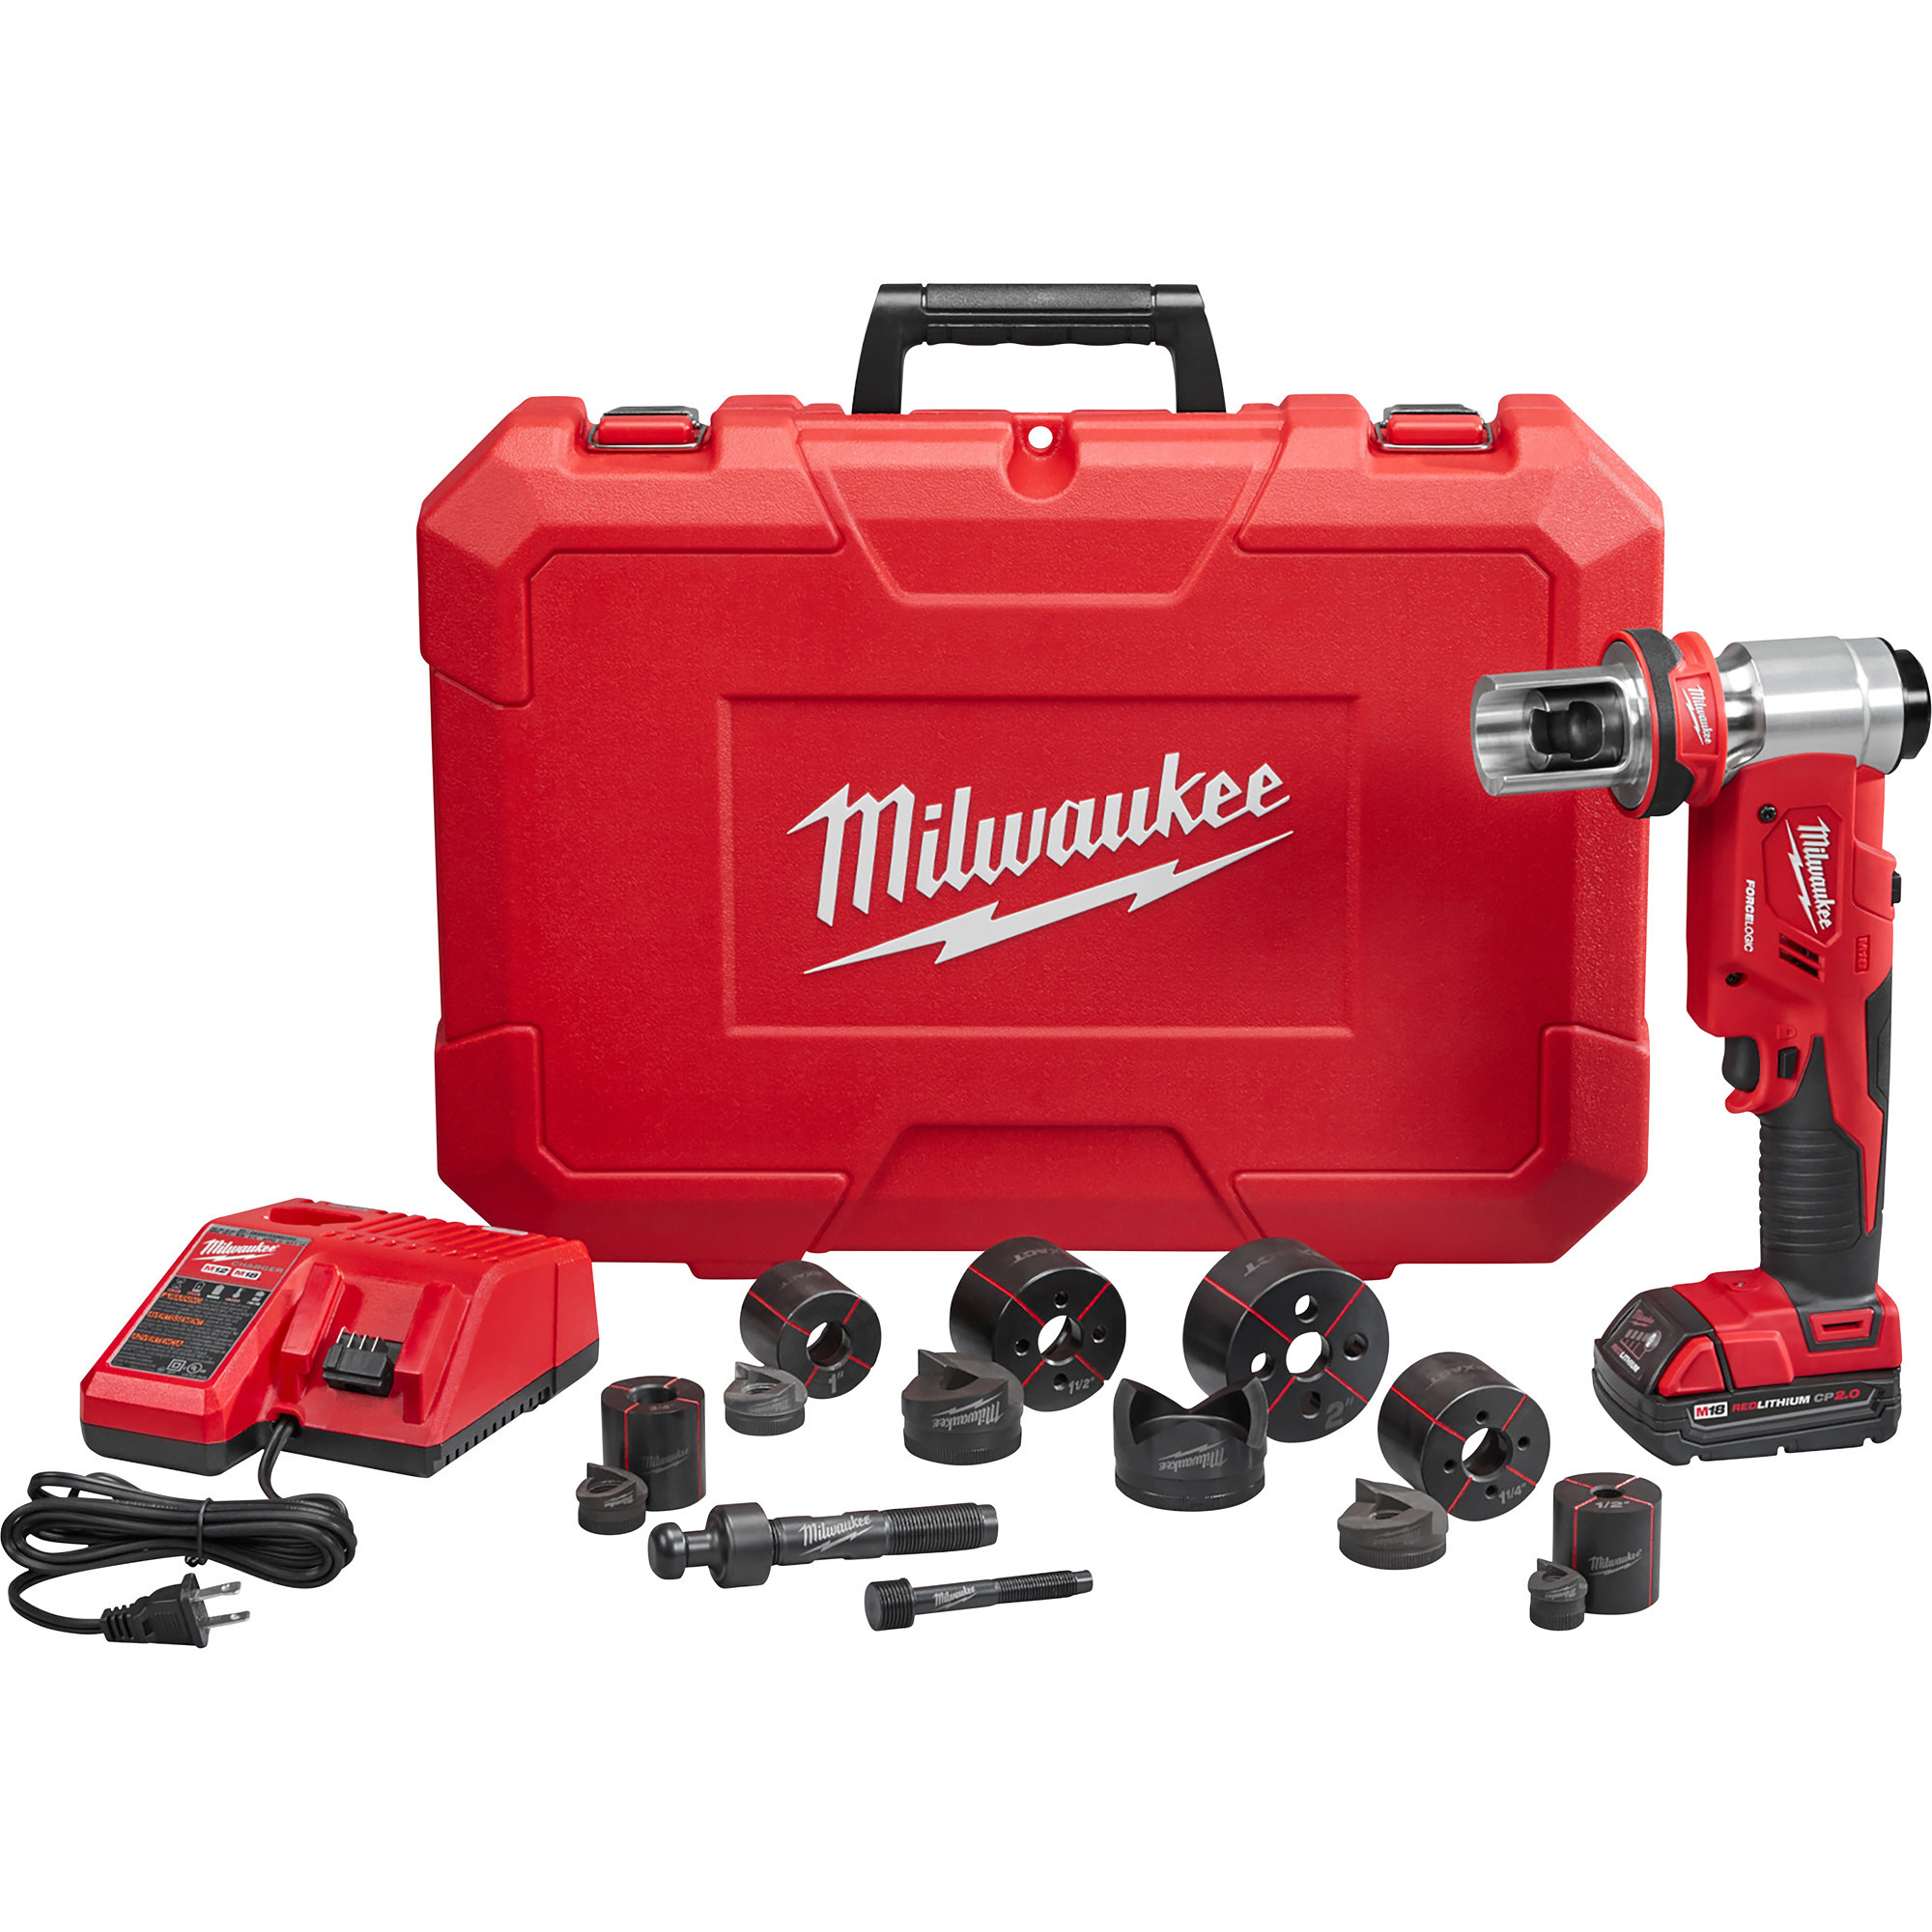 Milwaukee ForceLogic M18 Cordless 6-Ton Knockout Tool Kit, 1/2Inch-2Inch, 1 Battery, Model 2677-21